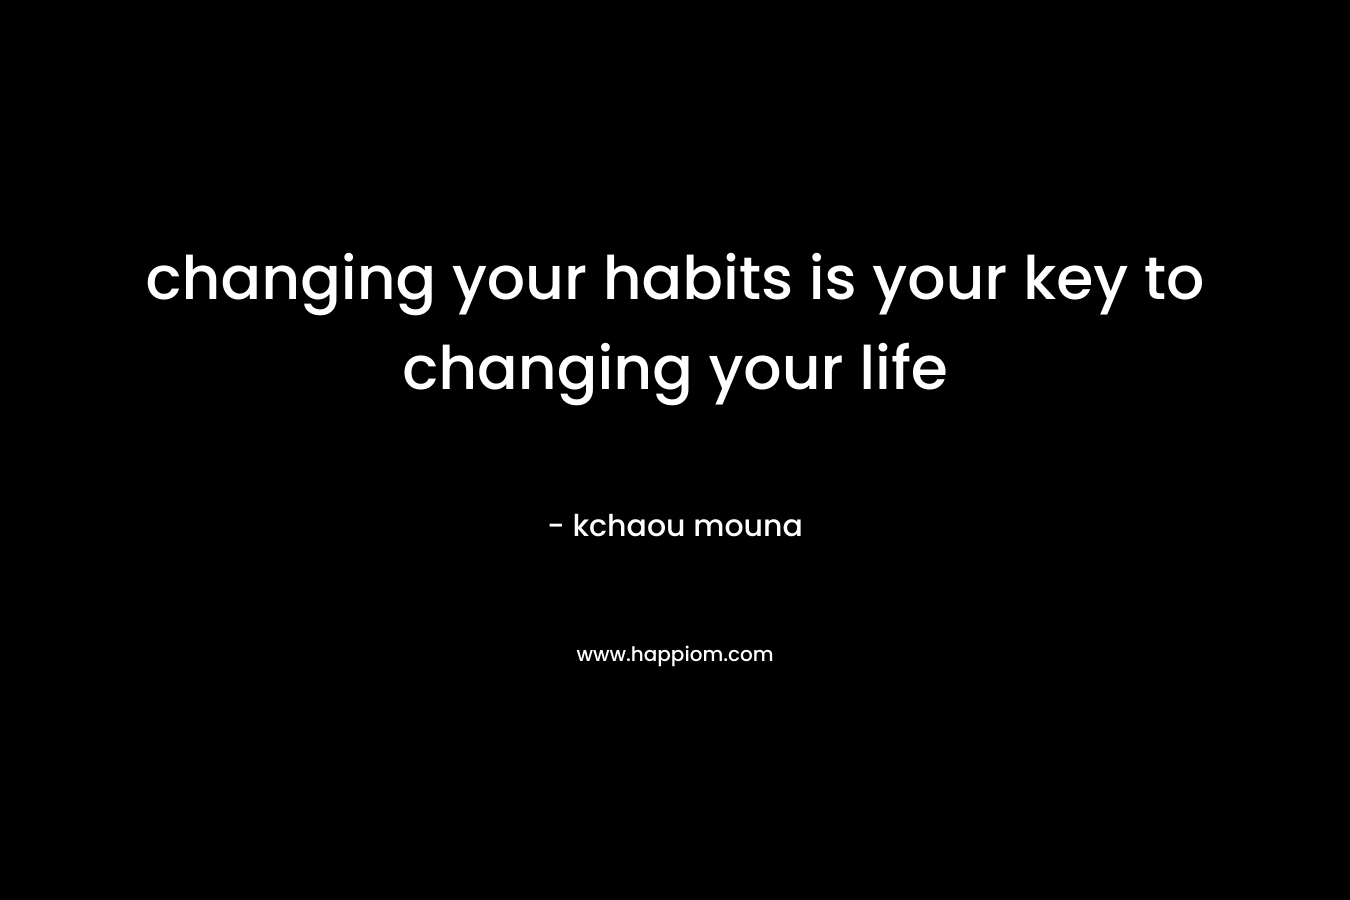 changing your habits is your key to changing your life